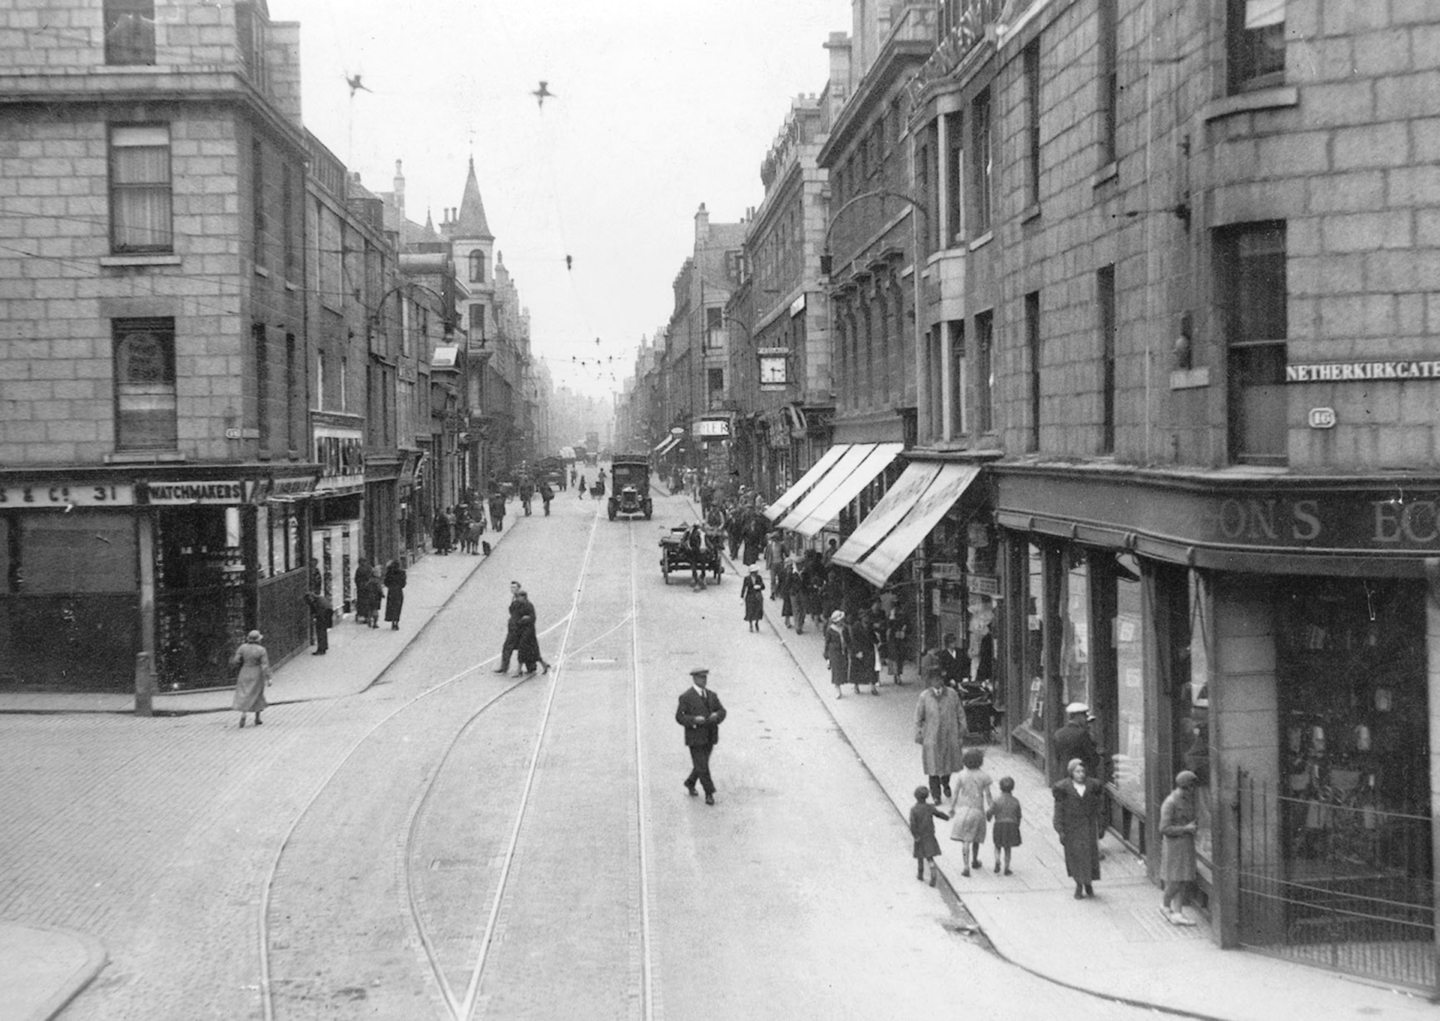 Tram lines and horse-drawn carts on Aberdeen's St Nicholas Street in this atmospheric picture, believed to be from the 1930s, with Morrison's store on the corner of Netherkirkgate which is now the site of Marks and Spencer